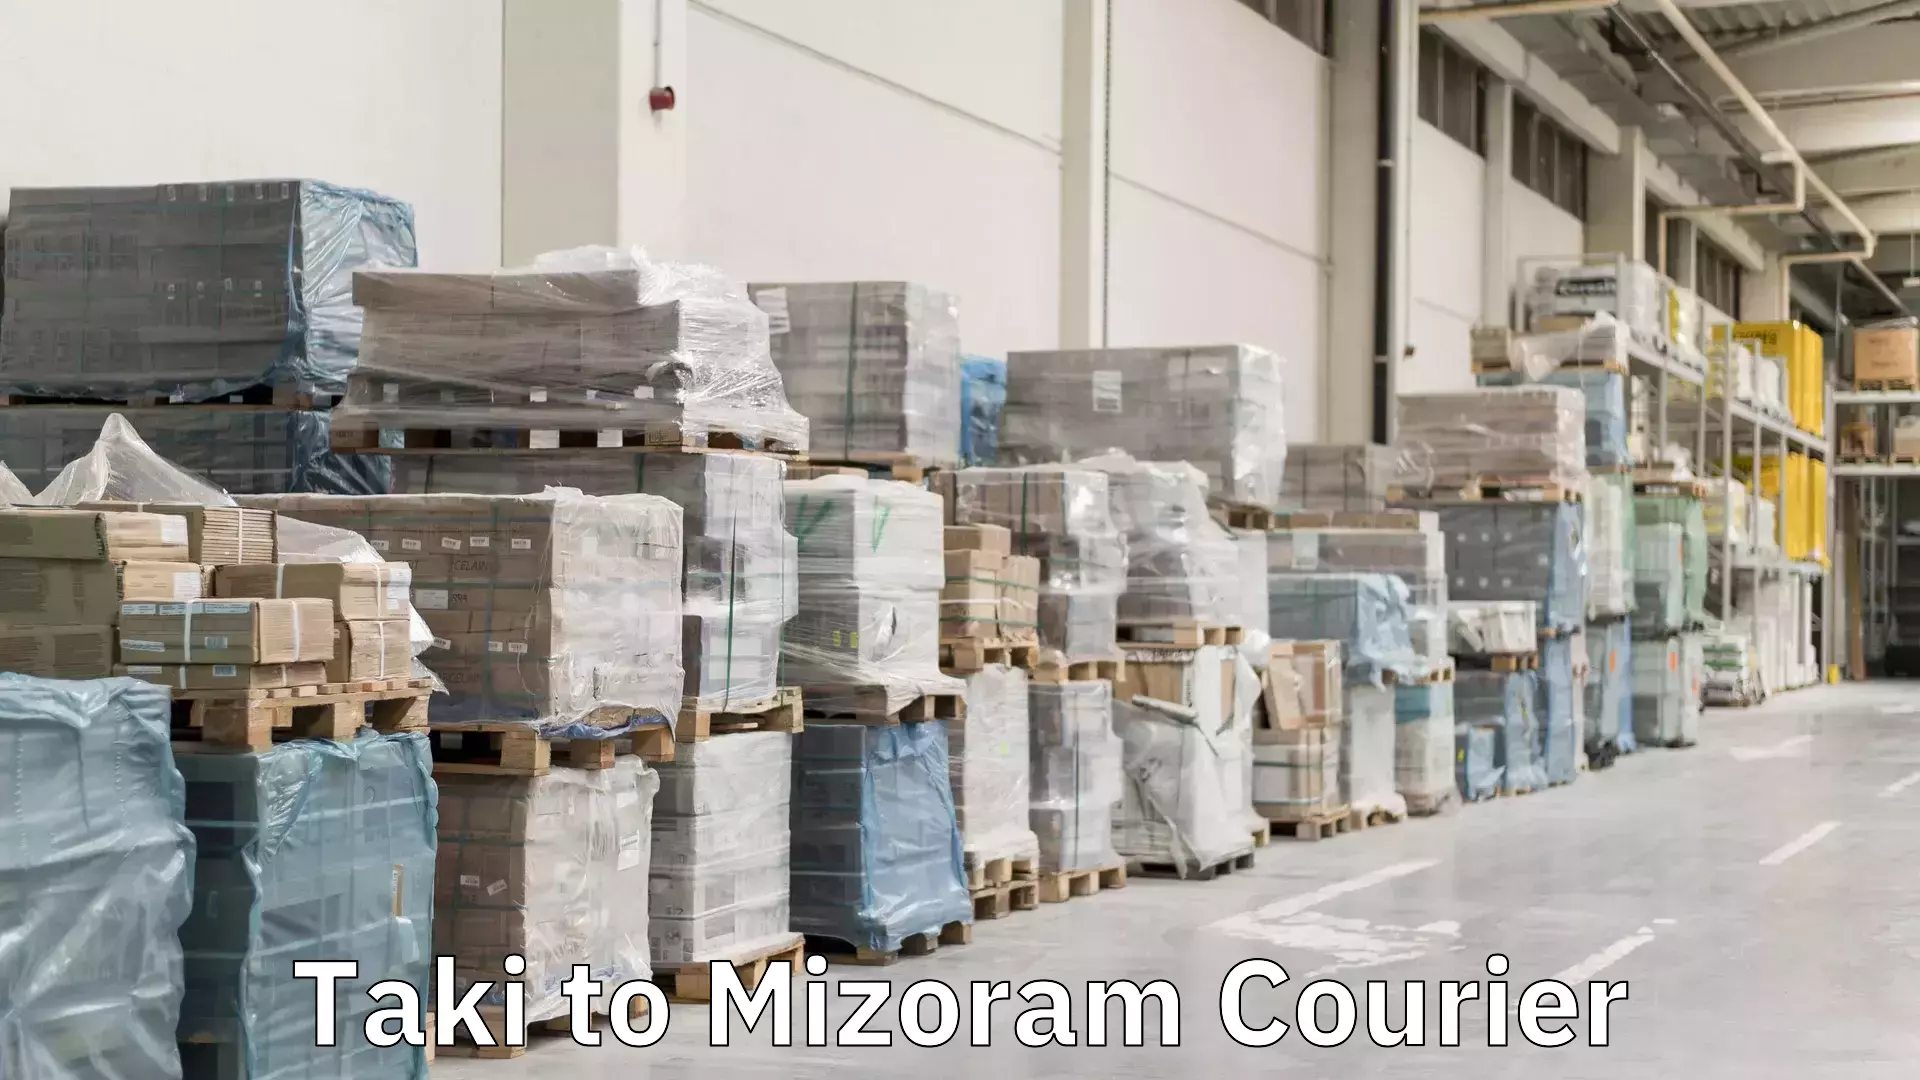 Package delivery network Taki to Mizoram